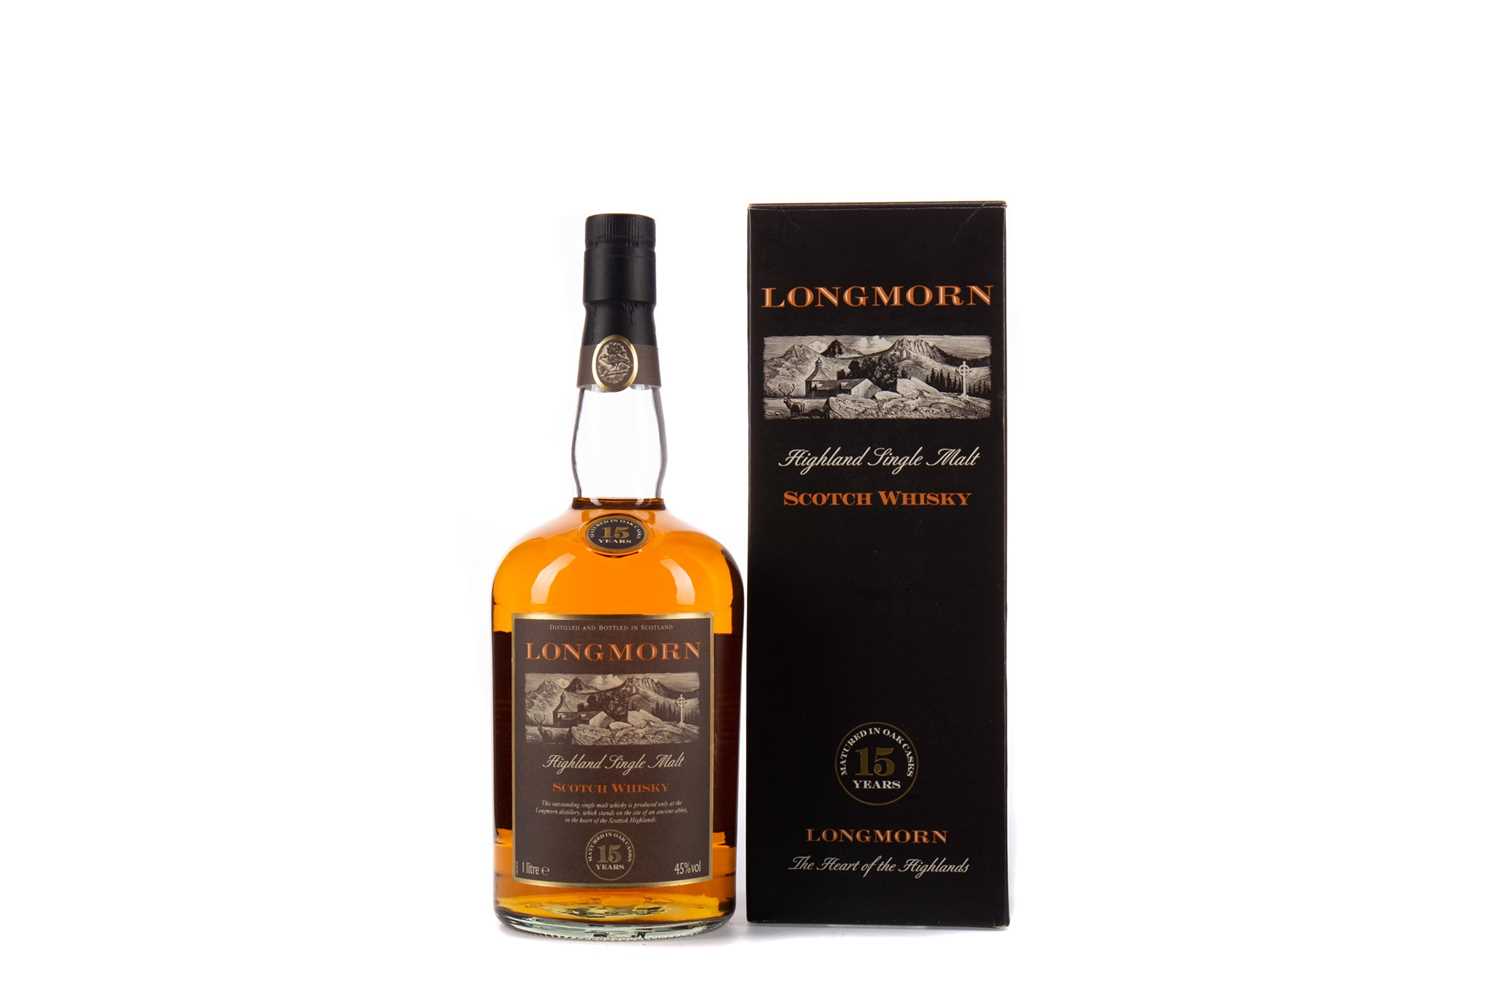 Lot 65 - LONGMORN AGED 15 YEARS - ONE LITRE